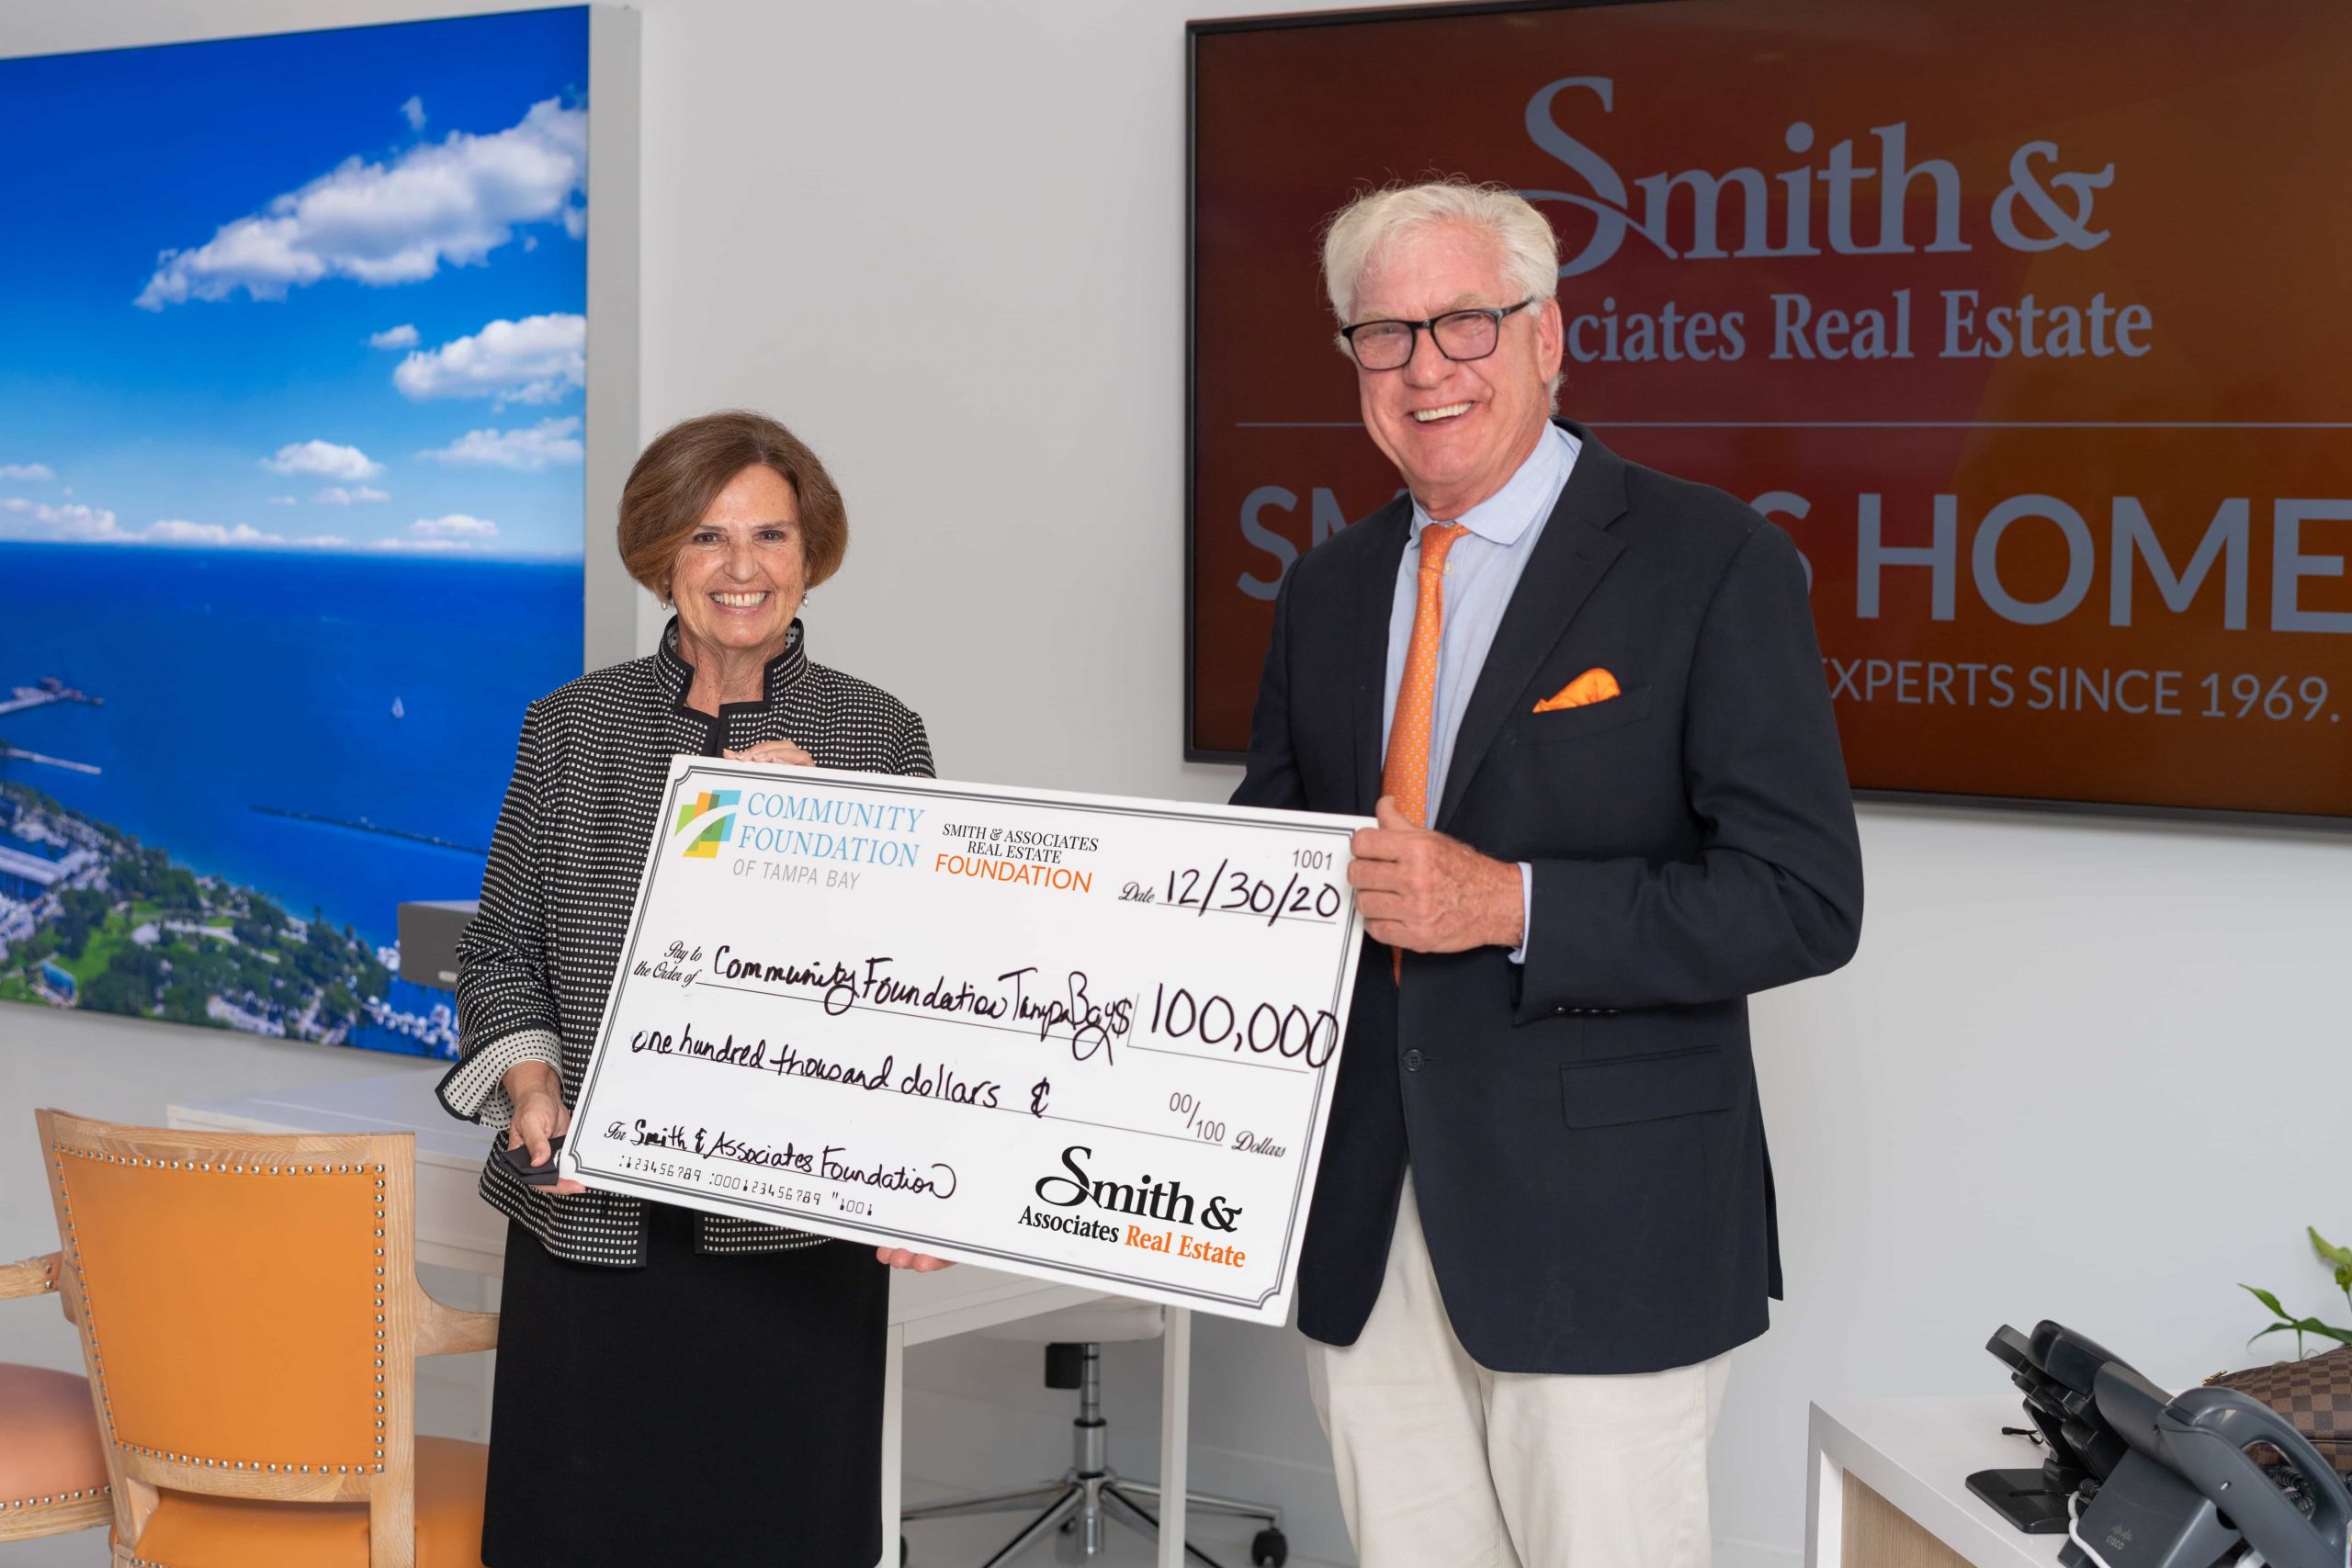 Bob Glaser, CEO & President of Smtih & Associates Real Estate present a $100,000 check to Marlene Spalten, President and CEO, Community Foundation of Tampa Bay